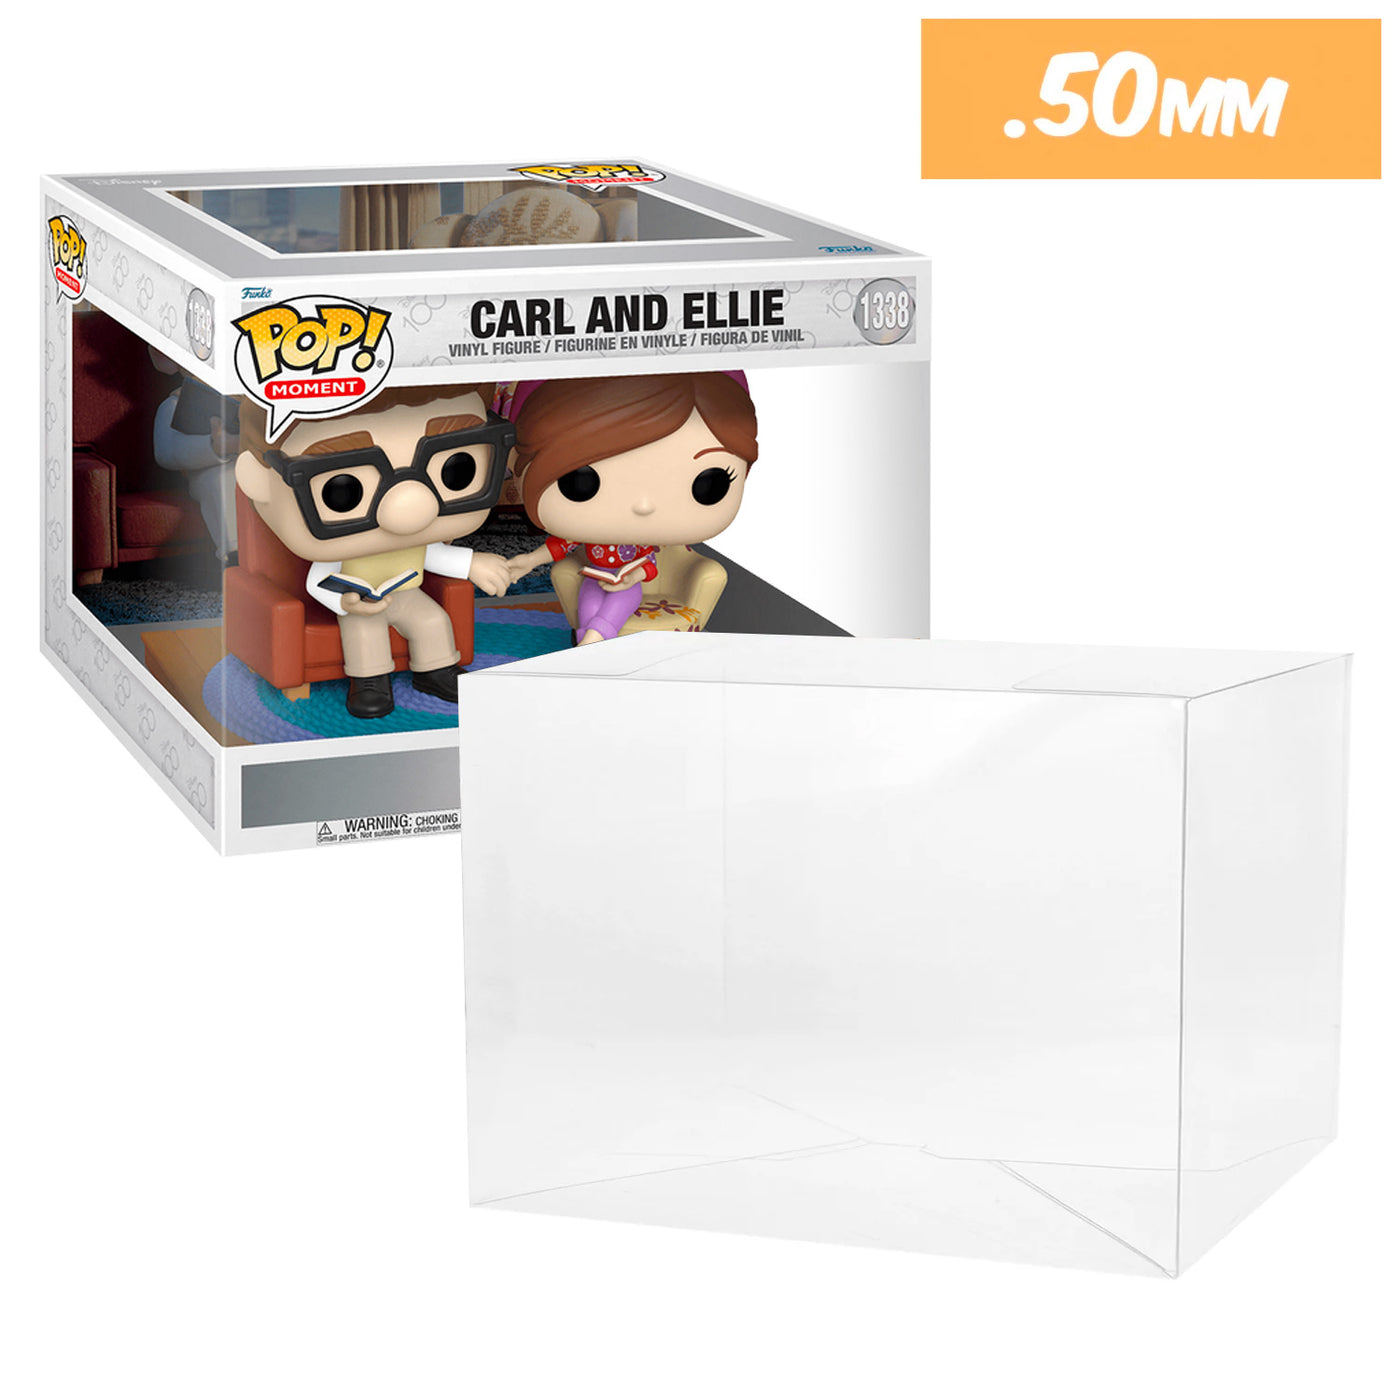 1338 up carl and ellie holding hands pop moment best funko pop protectors thick strong uv scratch flat top stack vinyl display geek plastic shield vaulted eco armor fits collect protect display case kollector